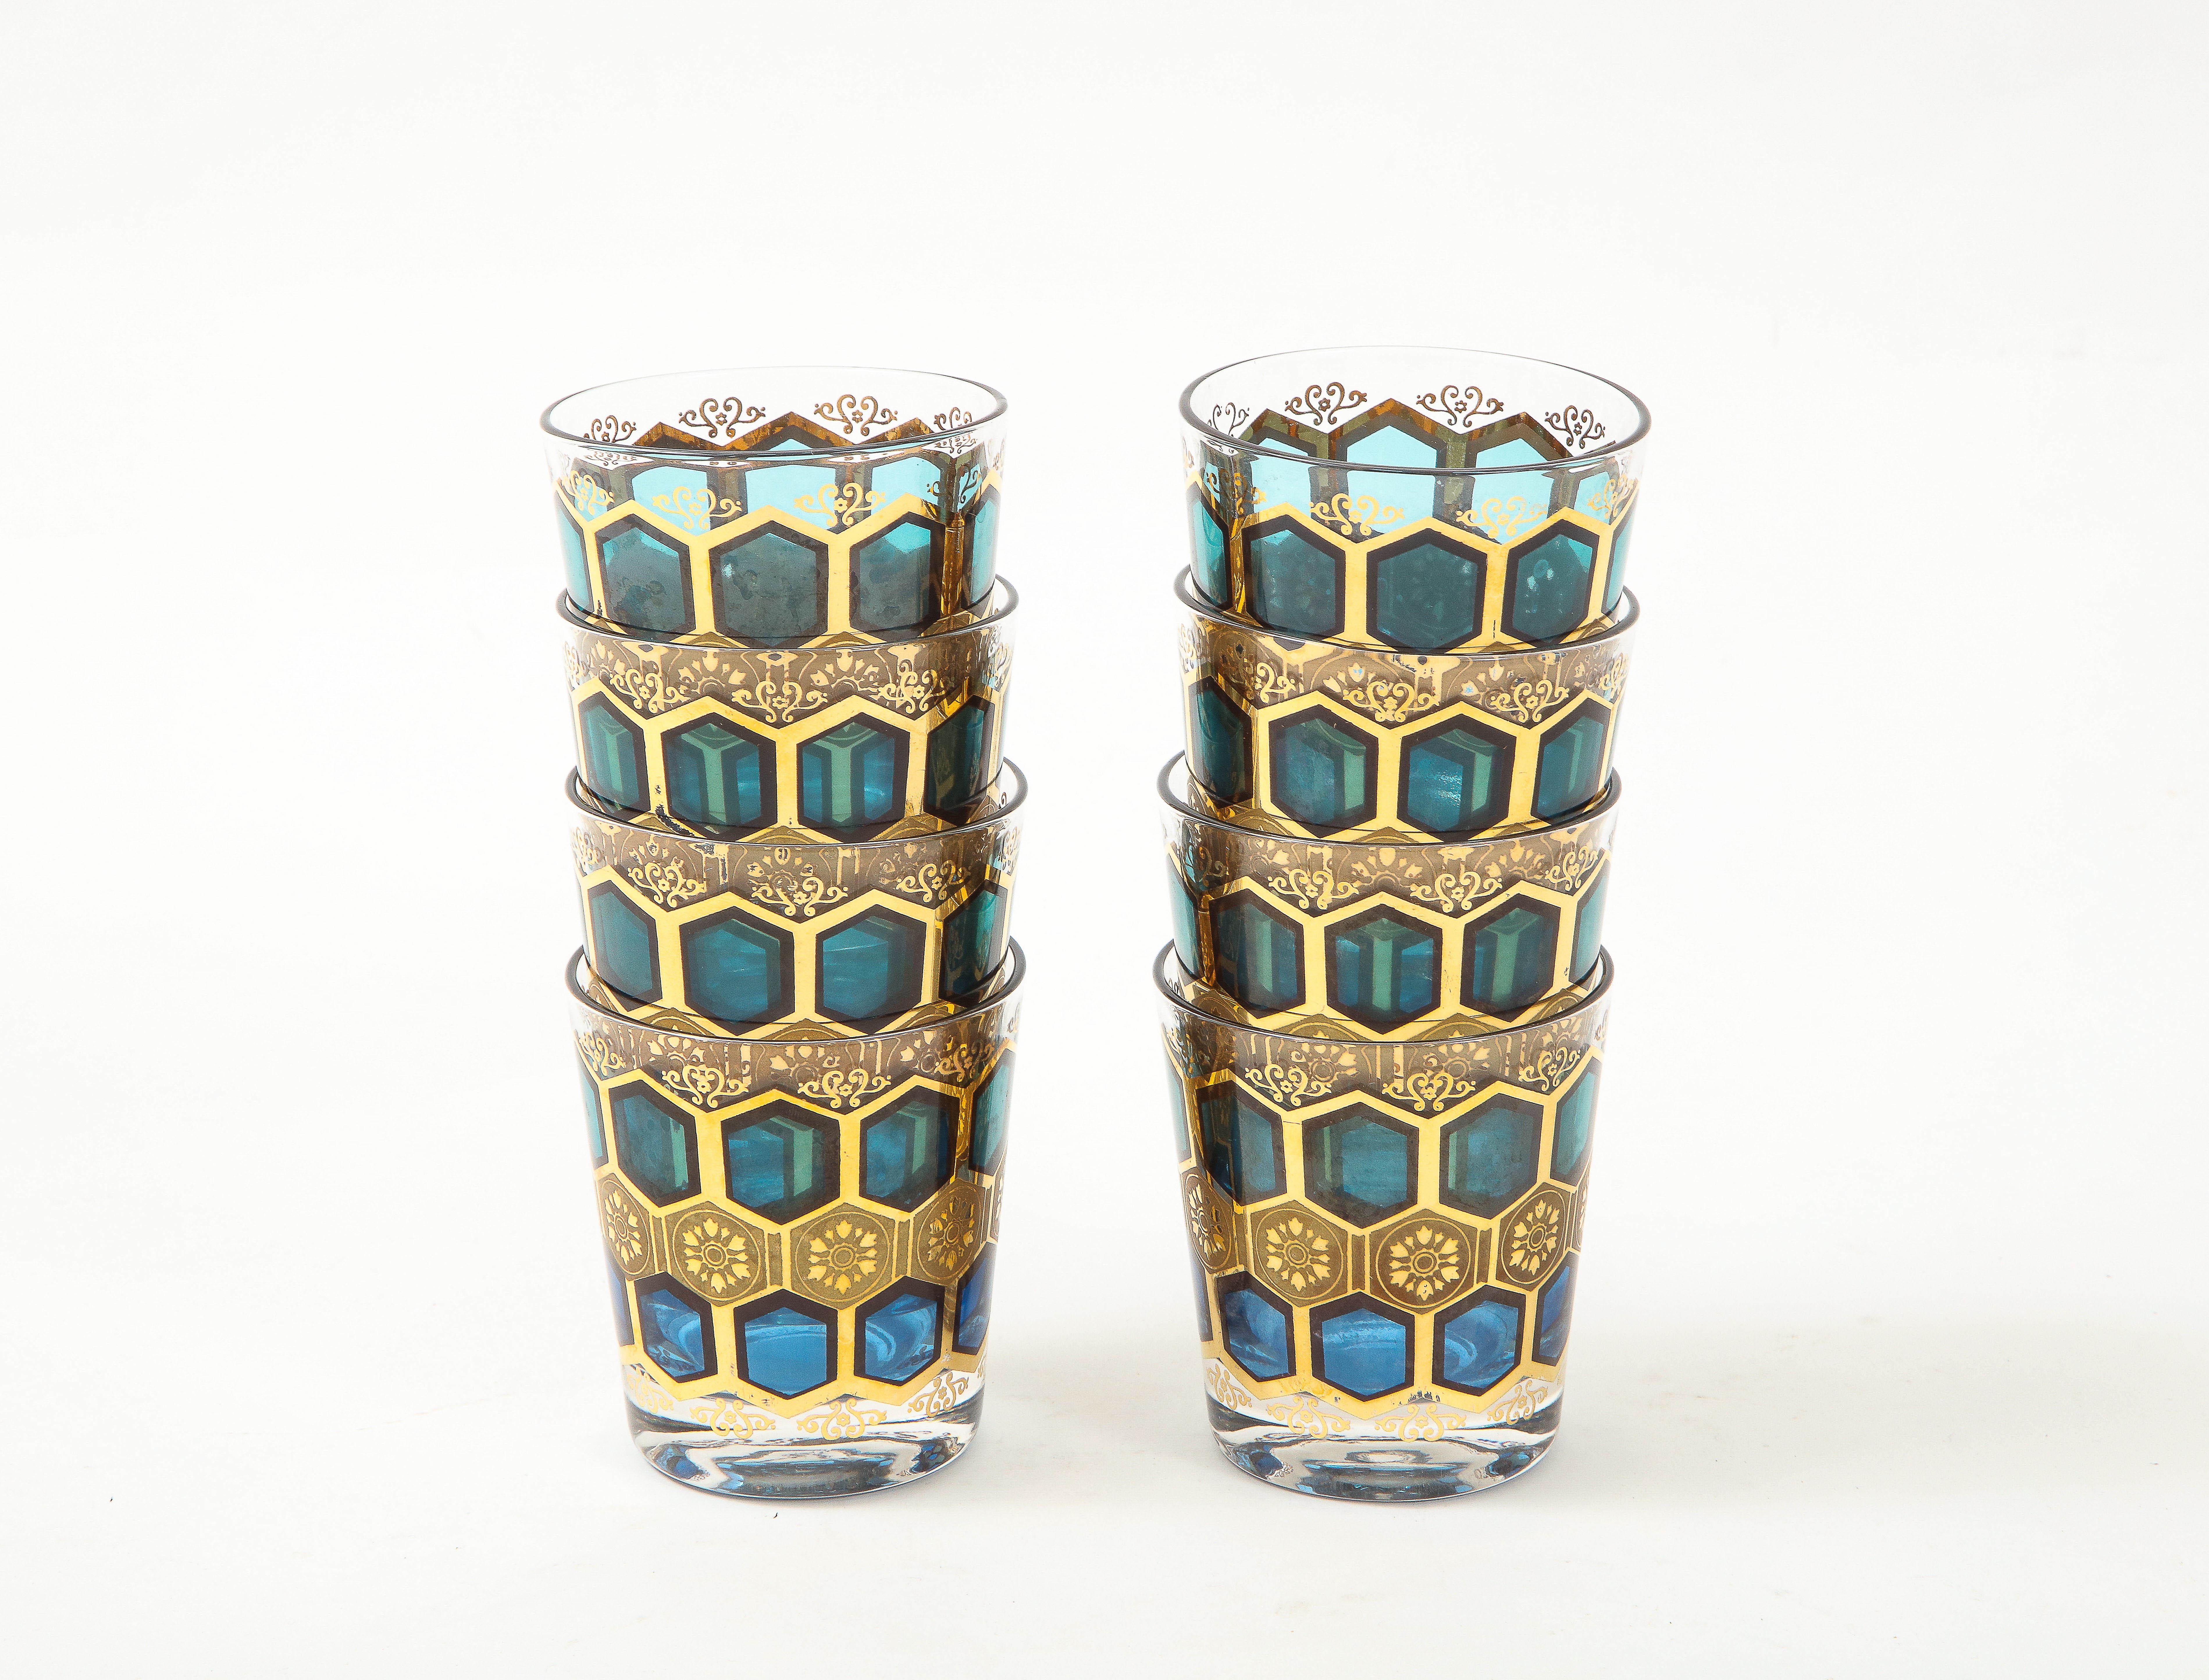 Complete set of 8 rocks glasses with blue window panes and 22kt gold electroplating. All in great condition.